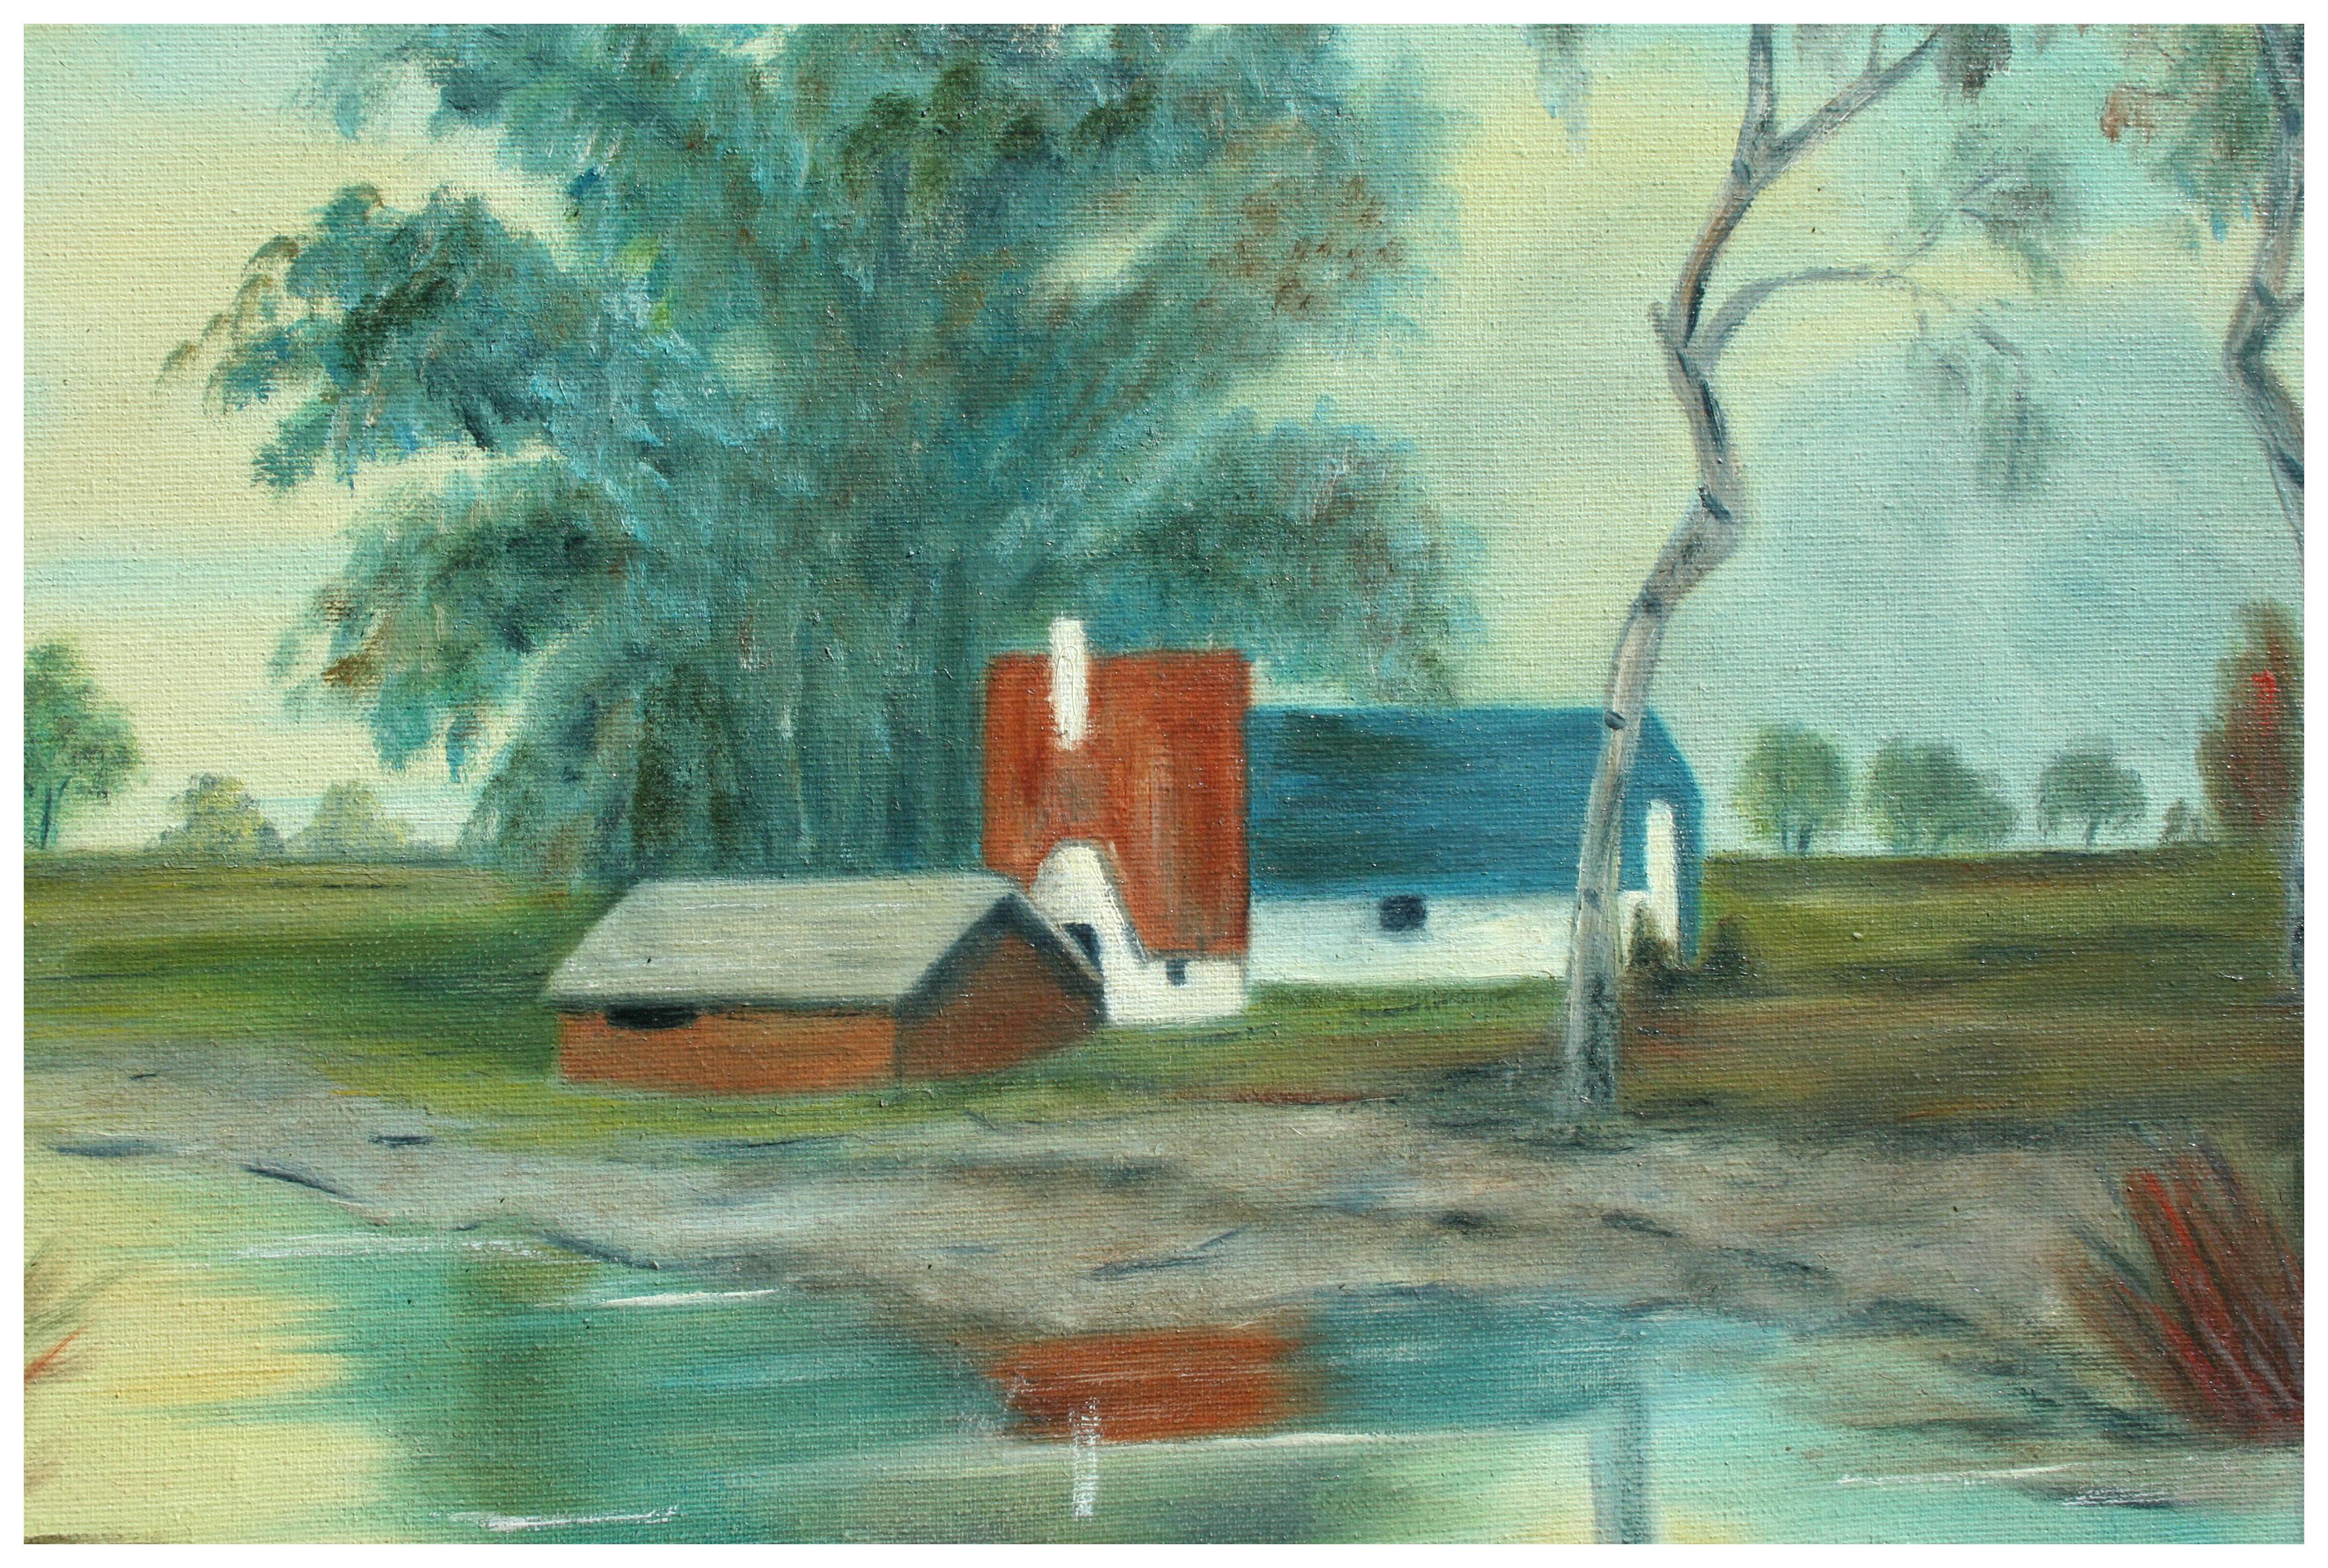 Farm on the River, Mid-Century Pastoral Landscape - American Impressionist Painting by Alice Egge